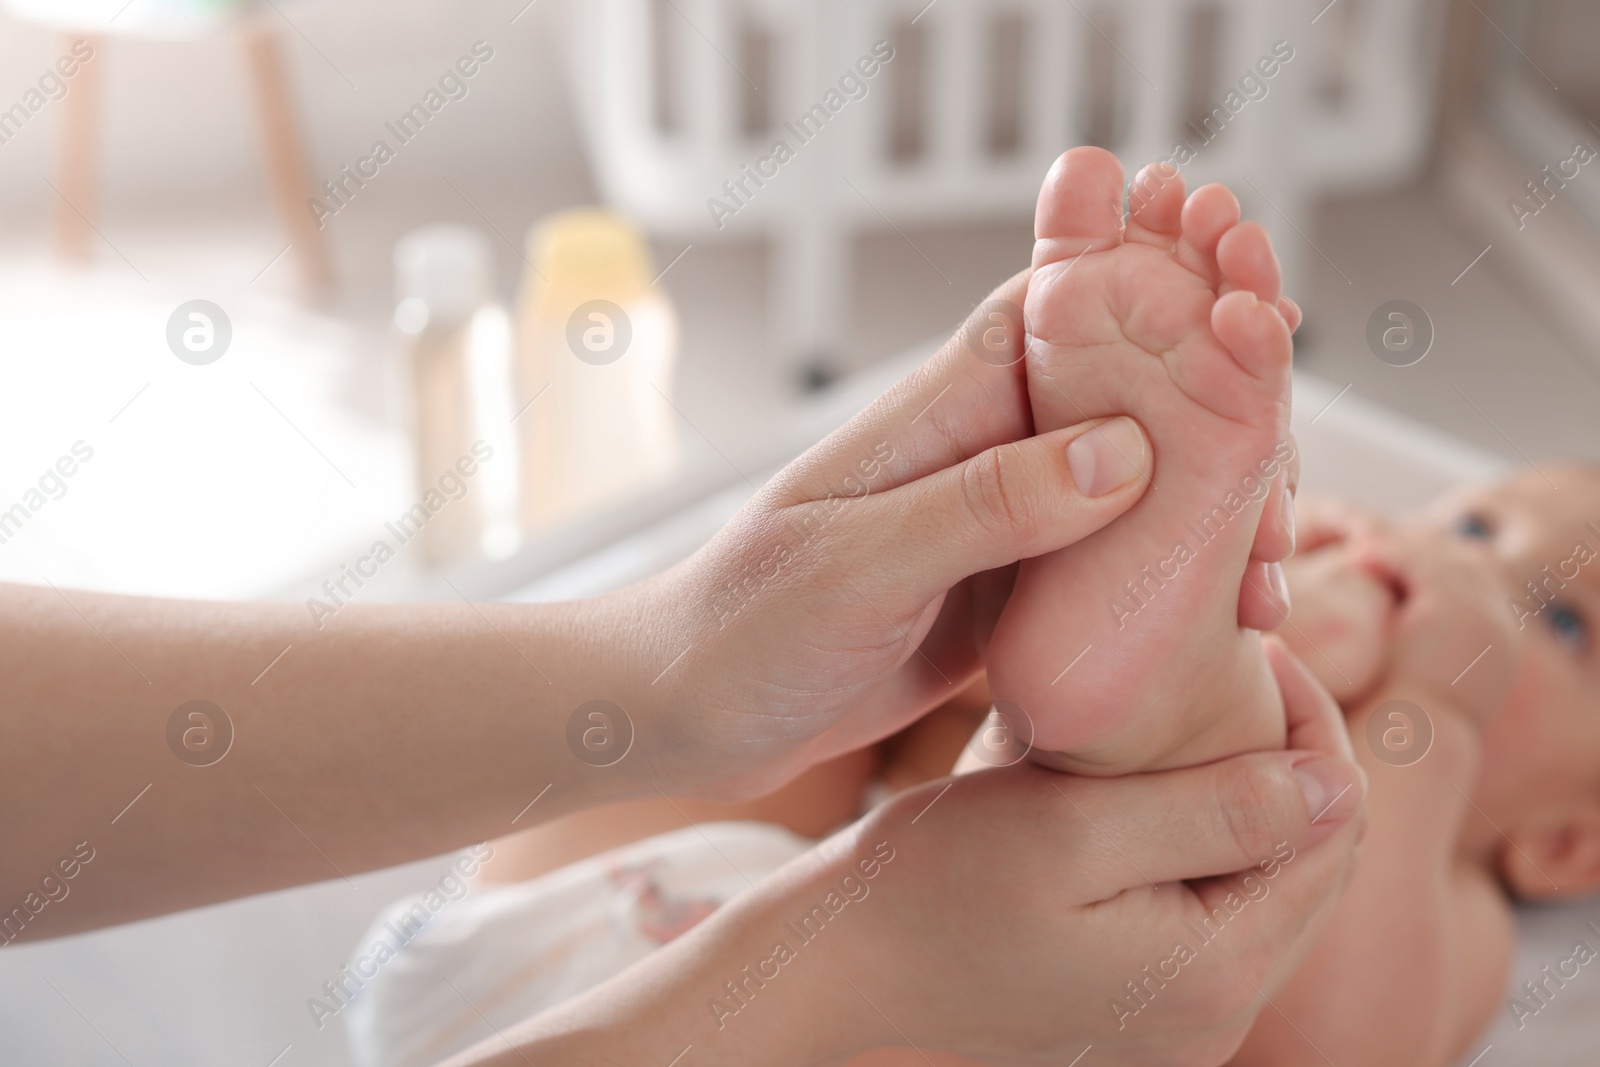 Photo of Mother massaging her baby with oil on changing table at home, closeup